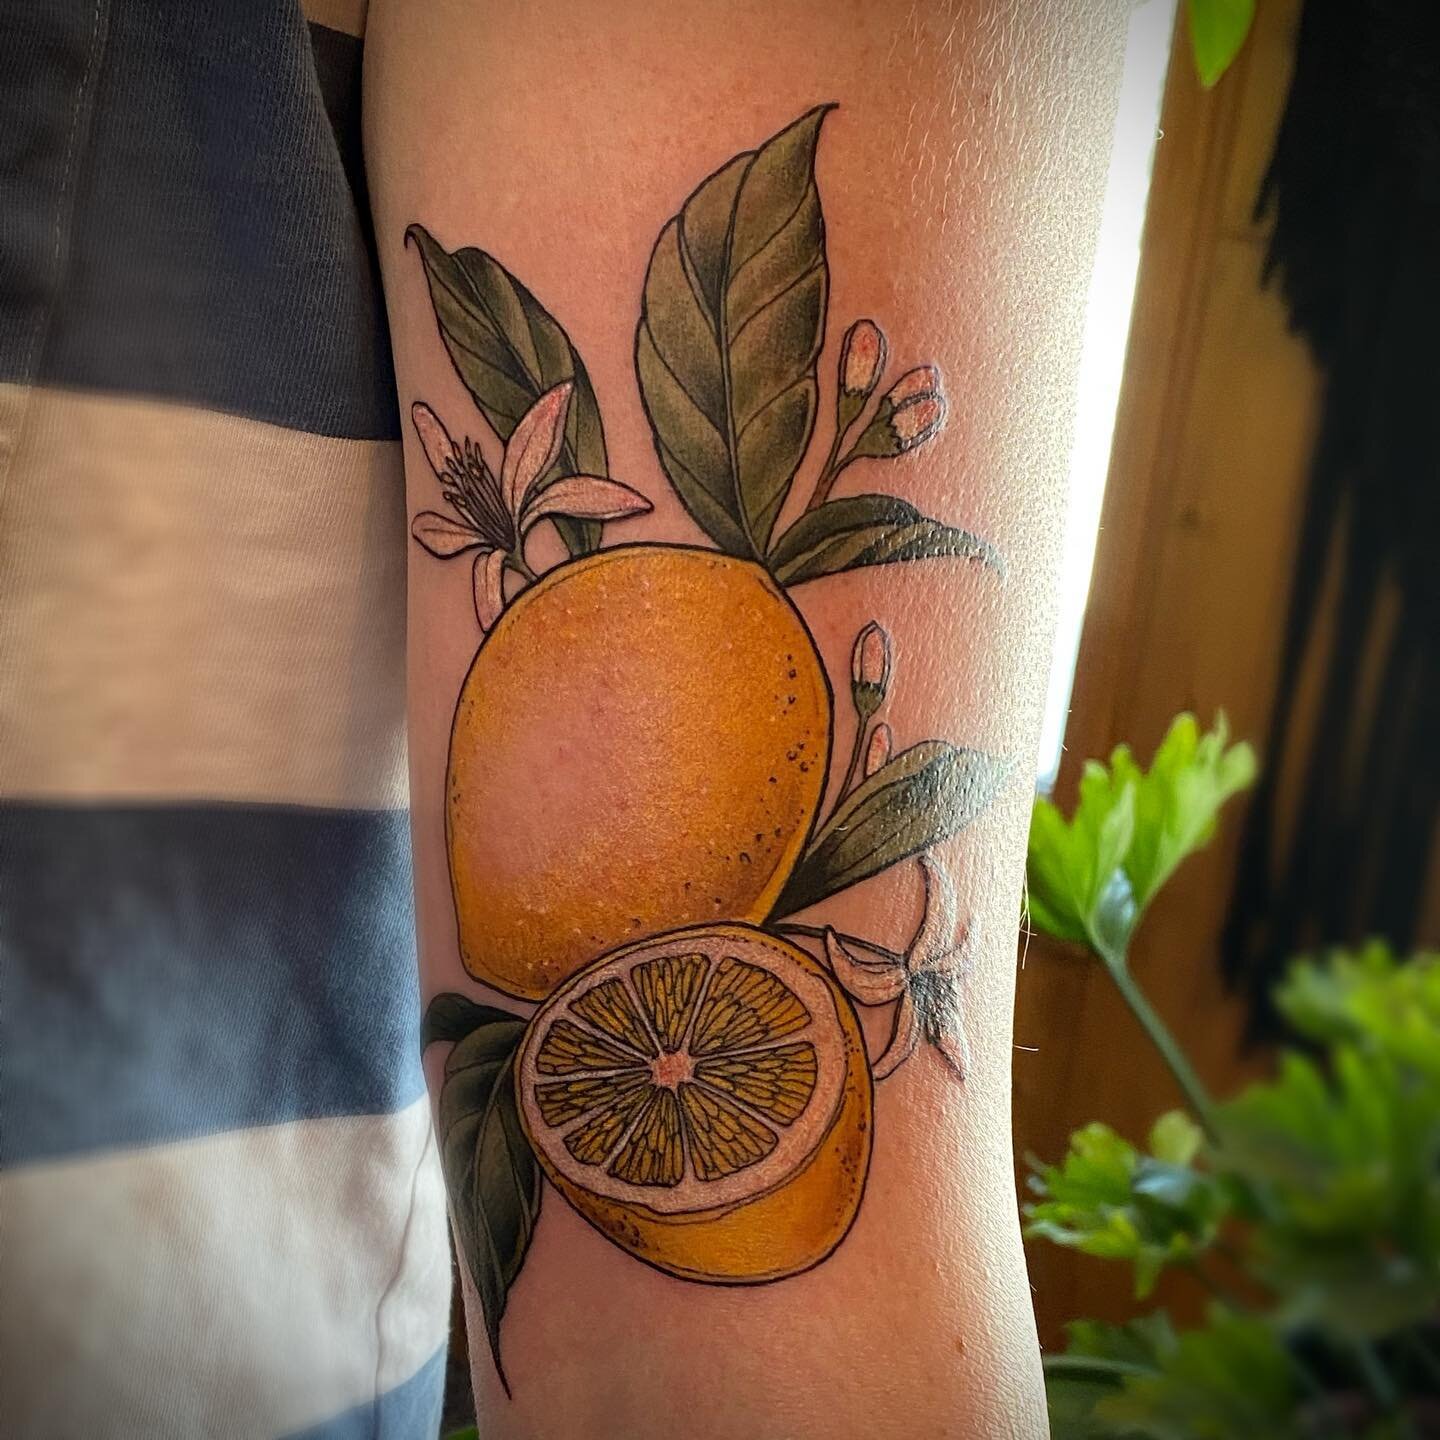 Forever sucking at tattoo photos- sorry for the glare! I had so much fun making this #lemon tattoo for my friend Jamie. He has an amazing food blog and is doing lots of great things with his business - including prepared meals and catering. Follow hi